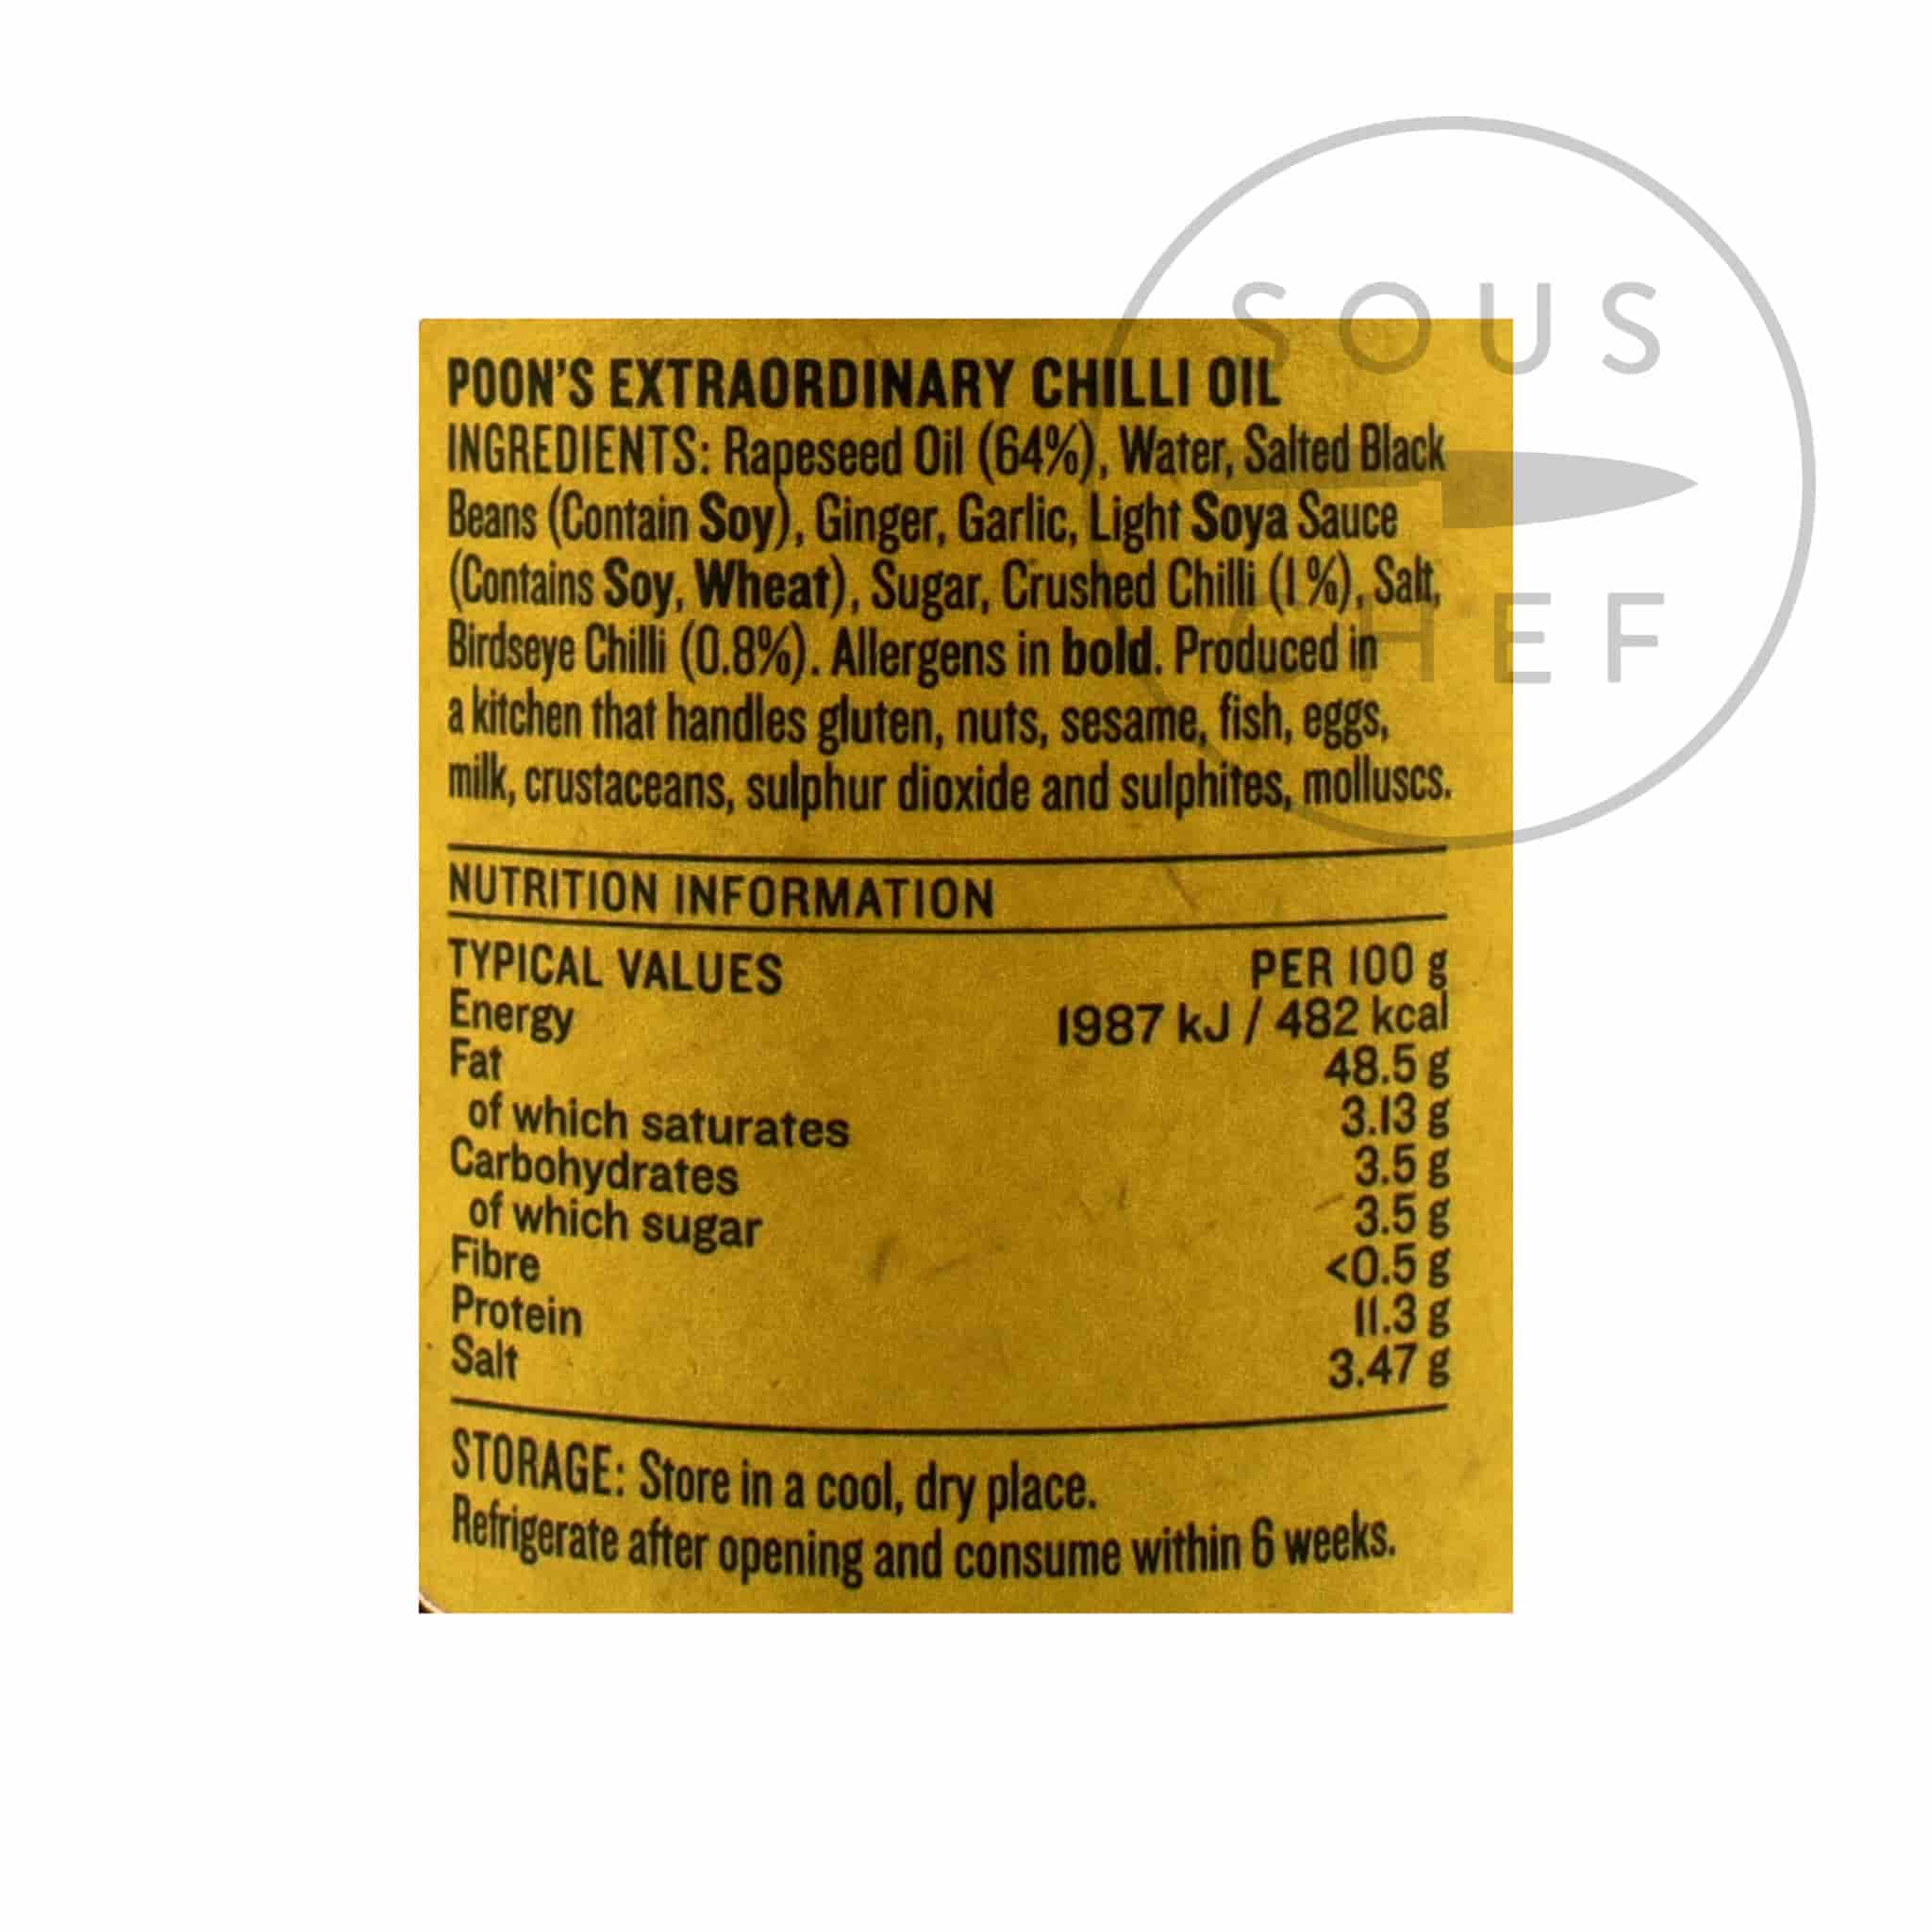 Poon's Extraordinary Chilli Oil 125g ingredients